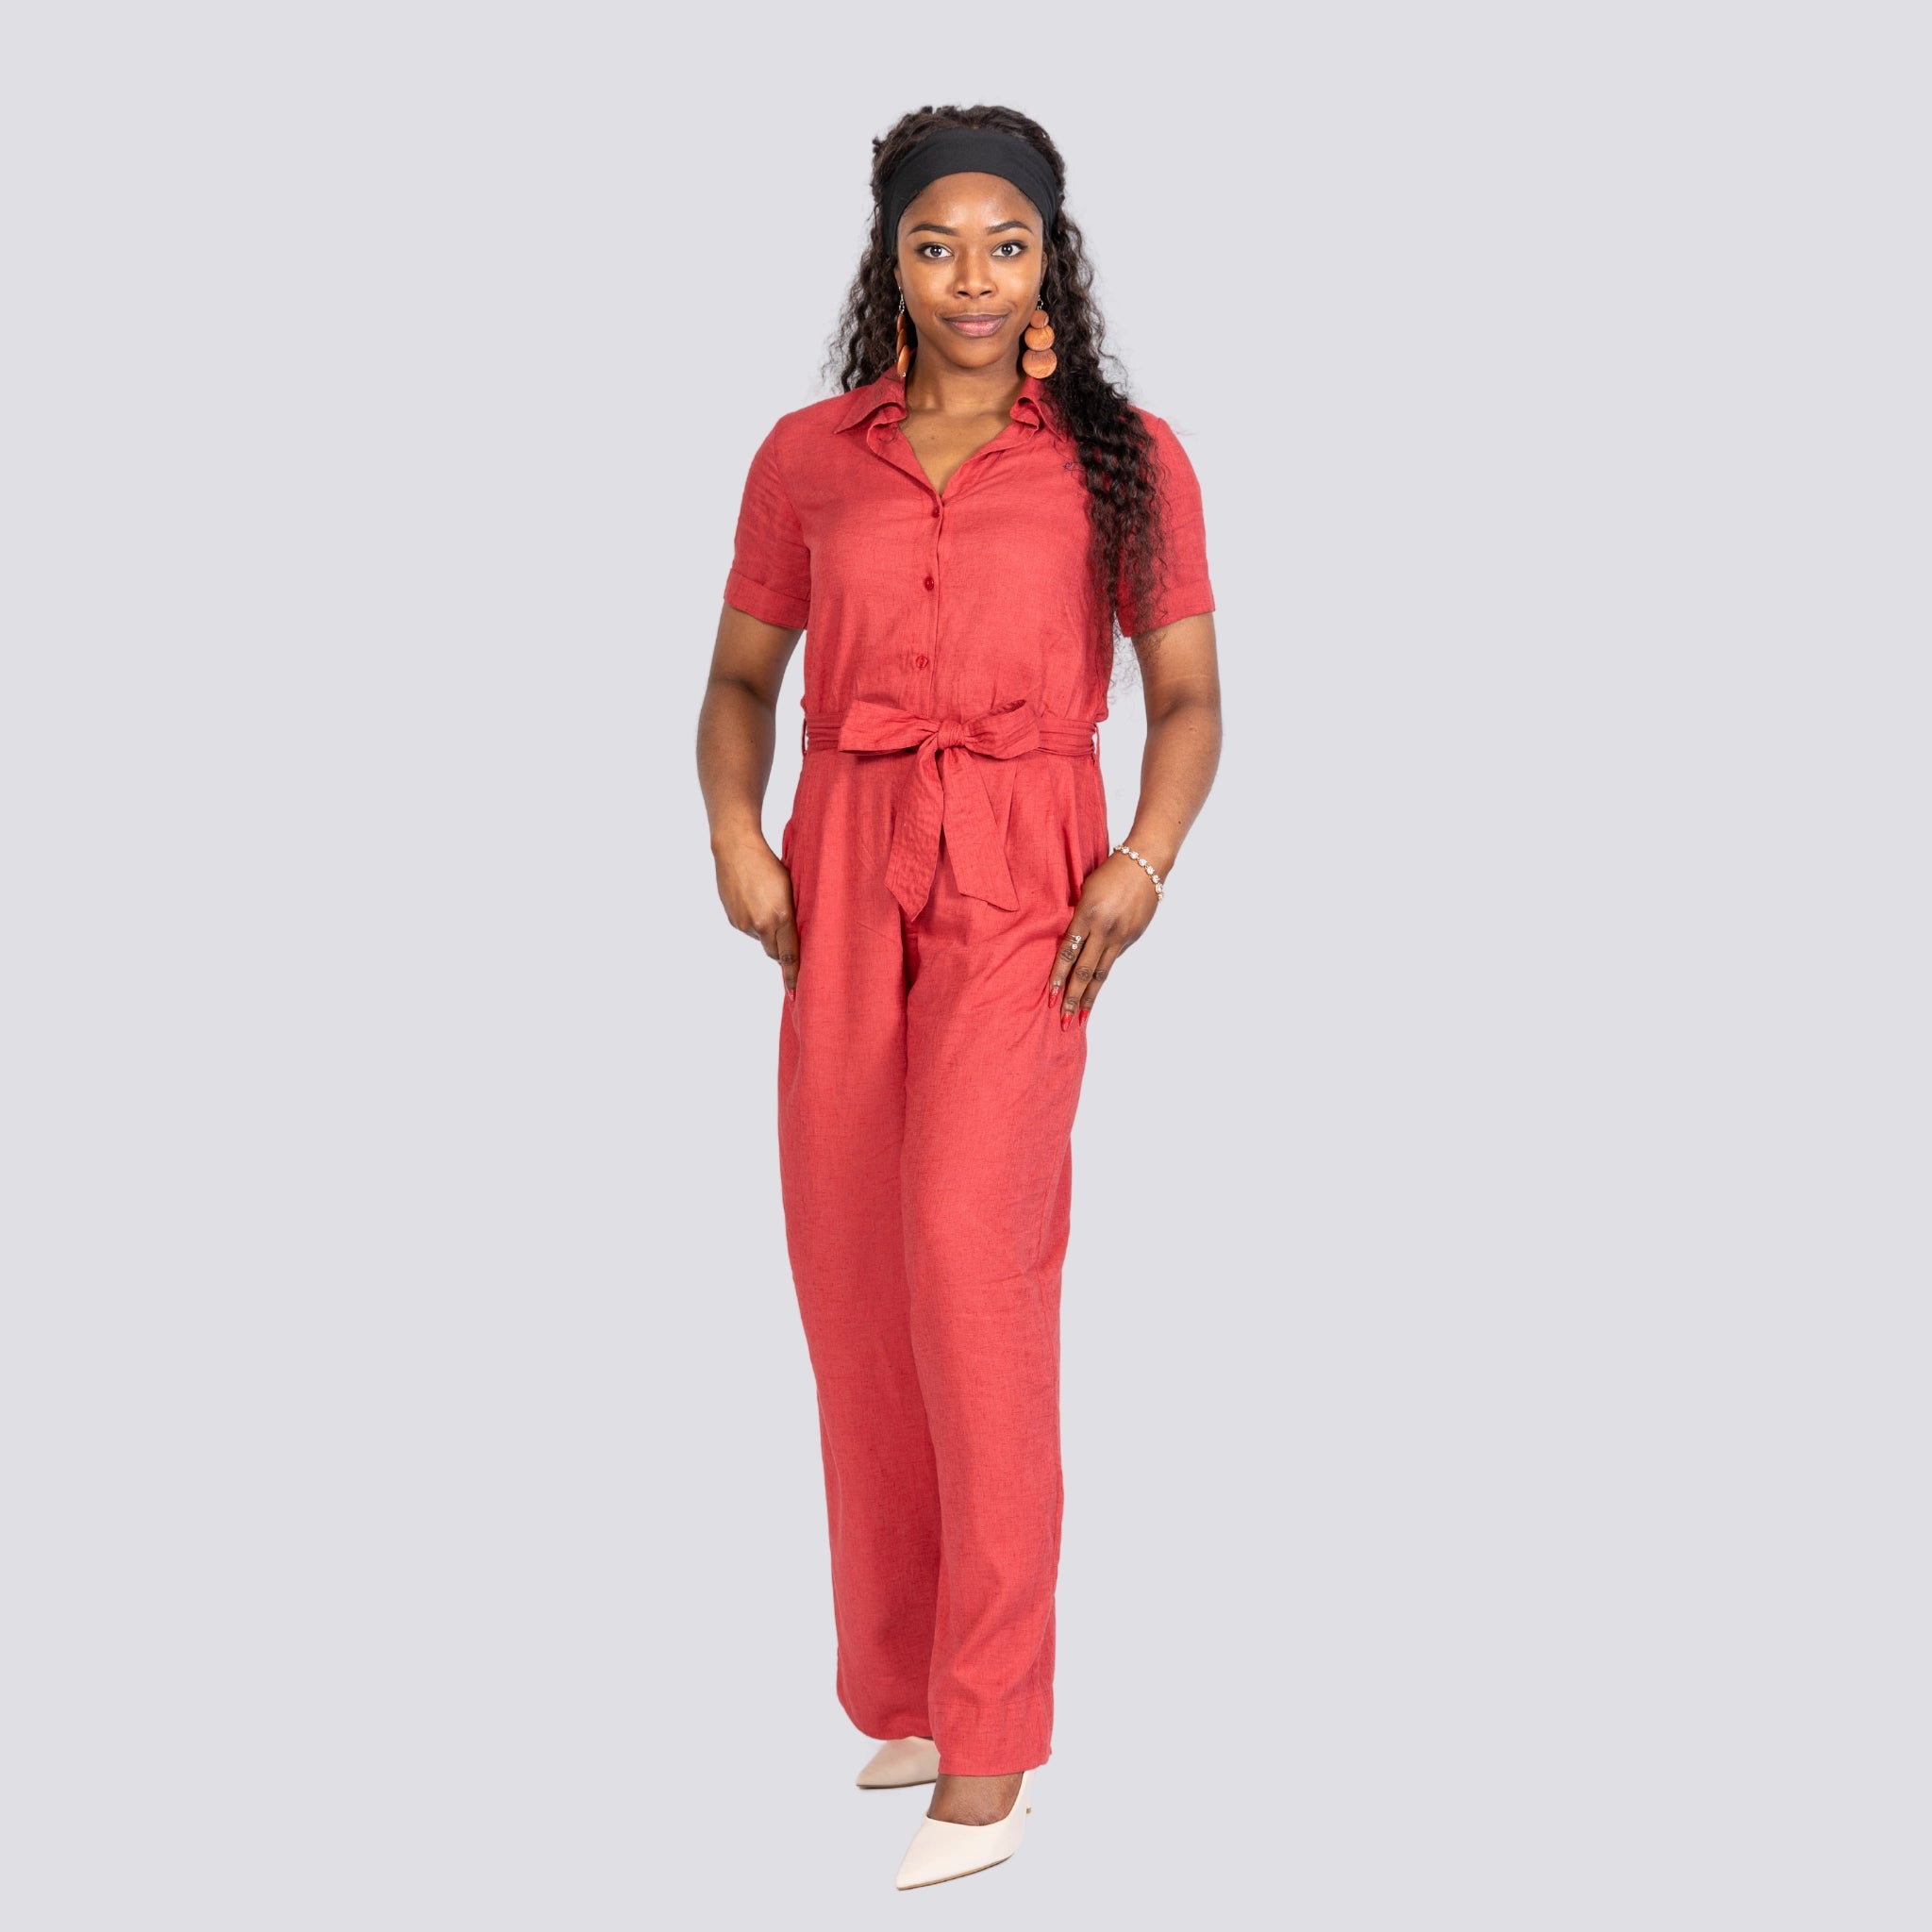 A woman in a Karee Milano Red Serenity Viscose Linen Jumpsuit and white shoes stands against a light gray background, looking at the camera.